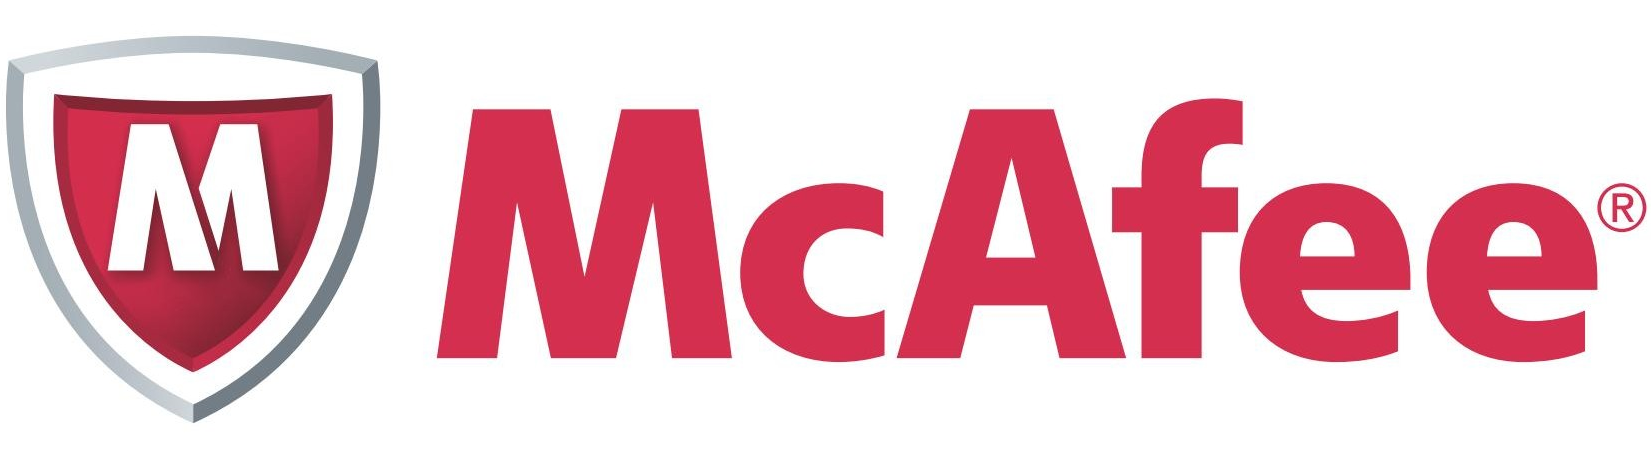 McAfee Hardware Support Parts-Only Service and Gold Technical Support - Extended Service - 1 Year - Service